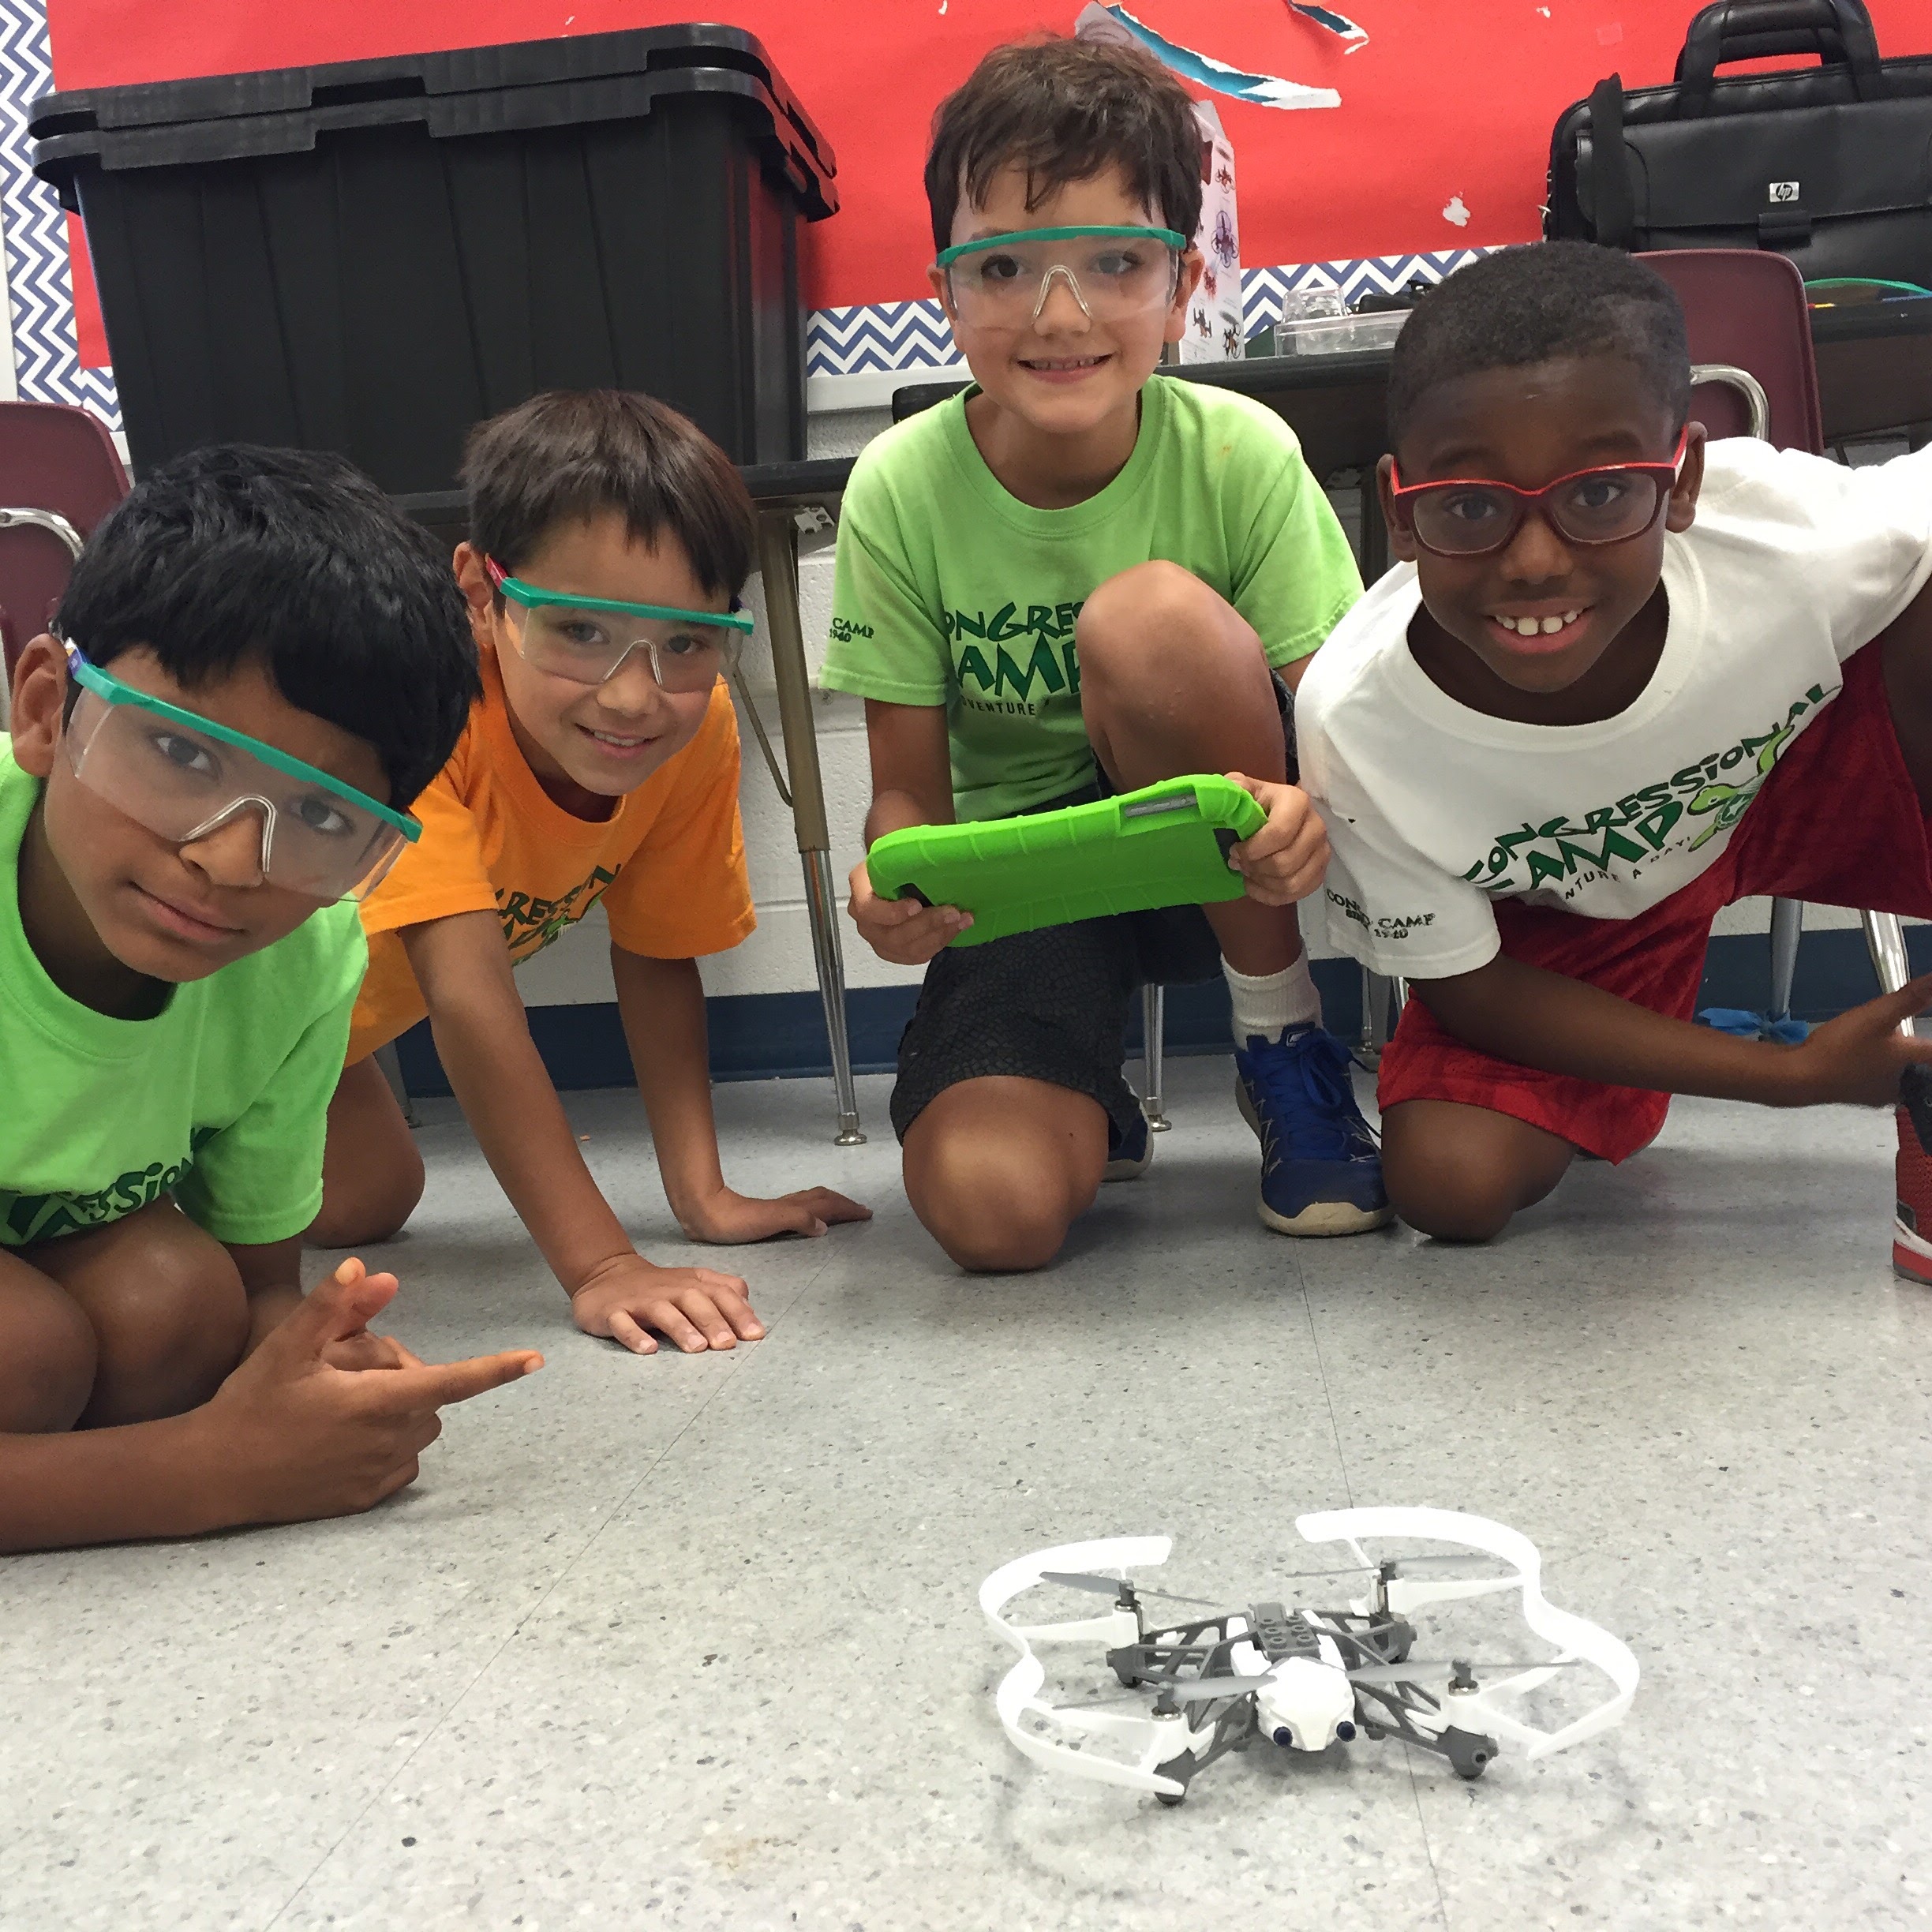 Turnkey-Summer-Camp-Robotics-STEM-Drone-Programming-Grant-Funded-Solutions